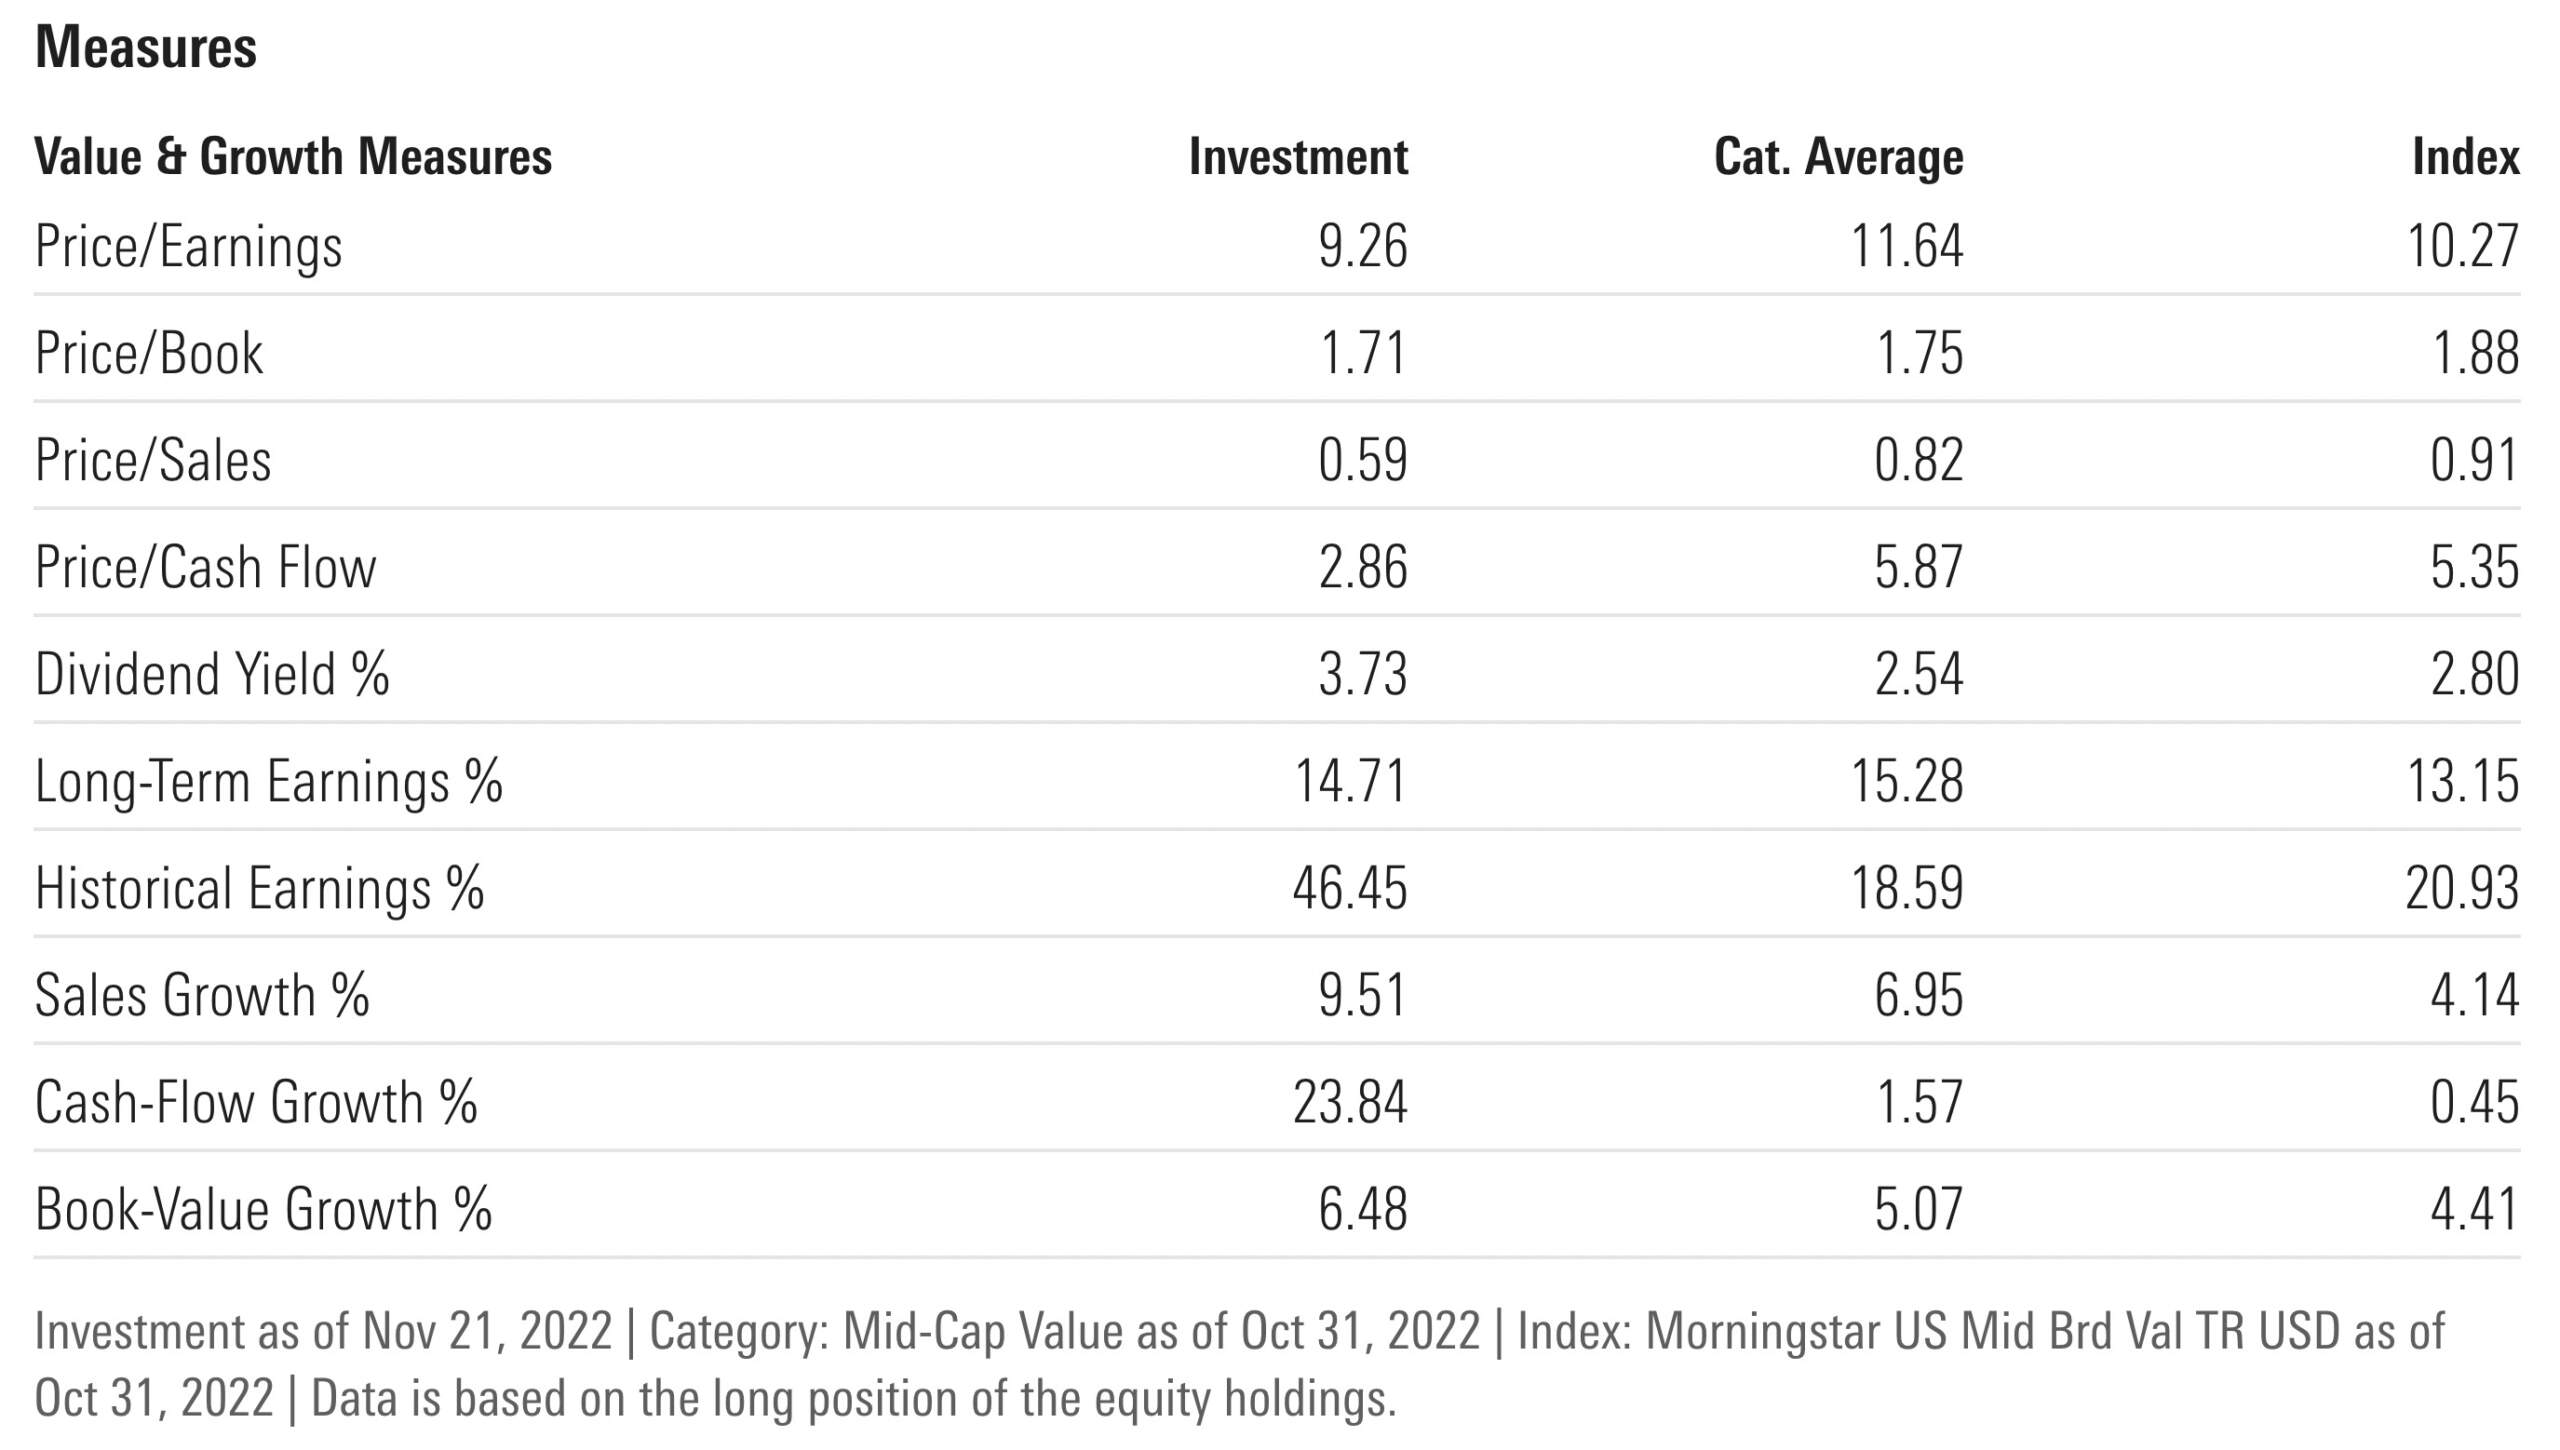 COWZ ETF Measures for Value and Growth